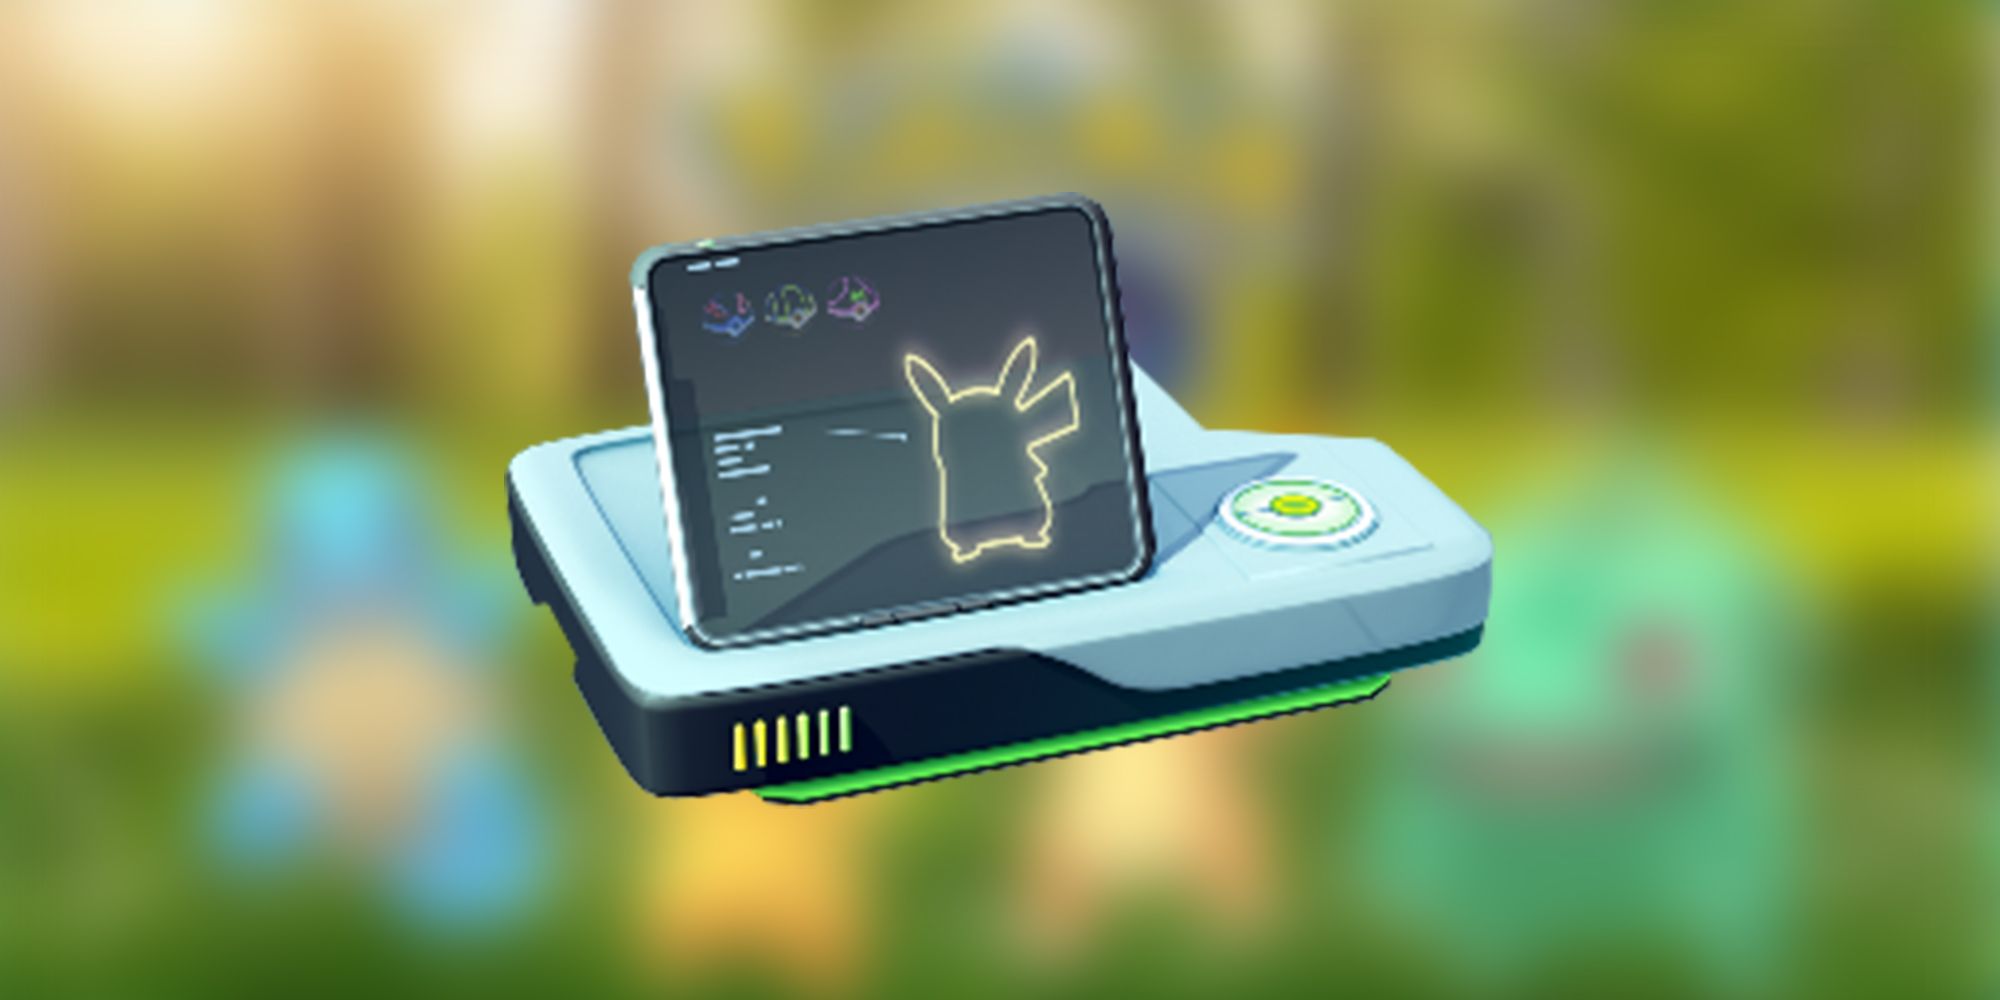 Pokemon Go: The Starter Box Is Back in the Store « SuperParent